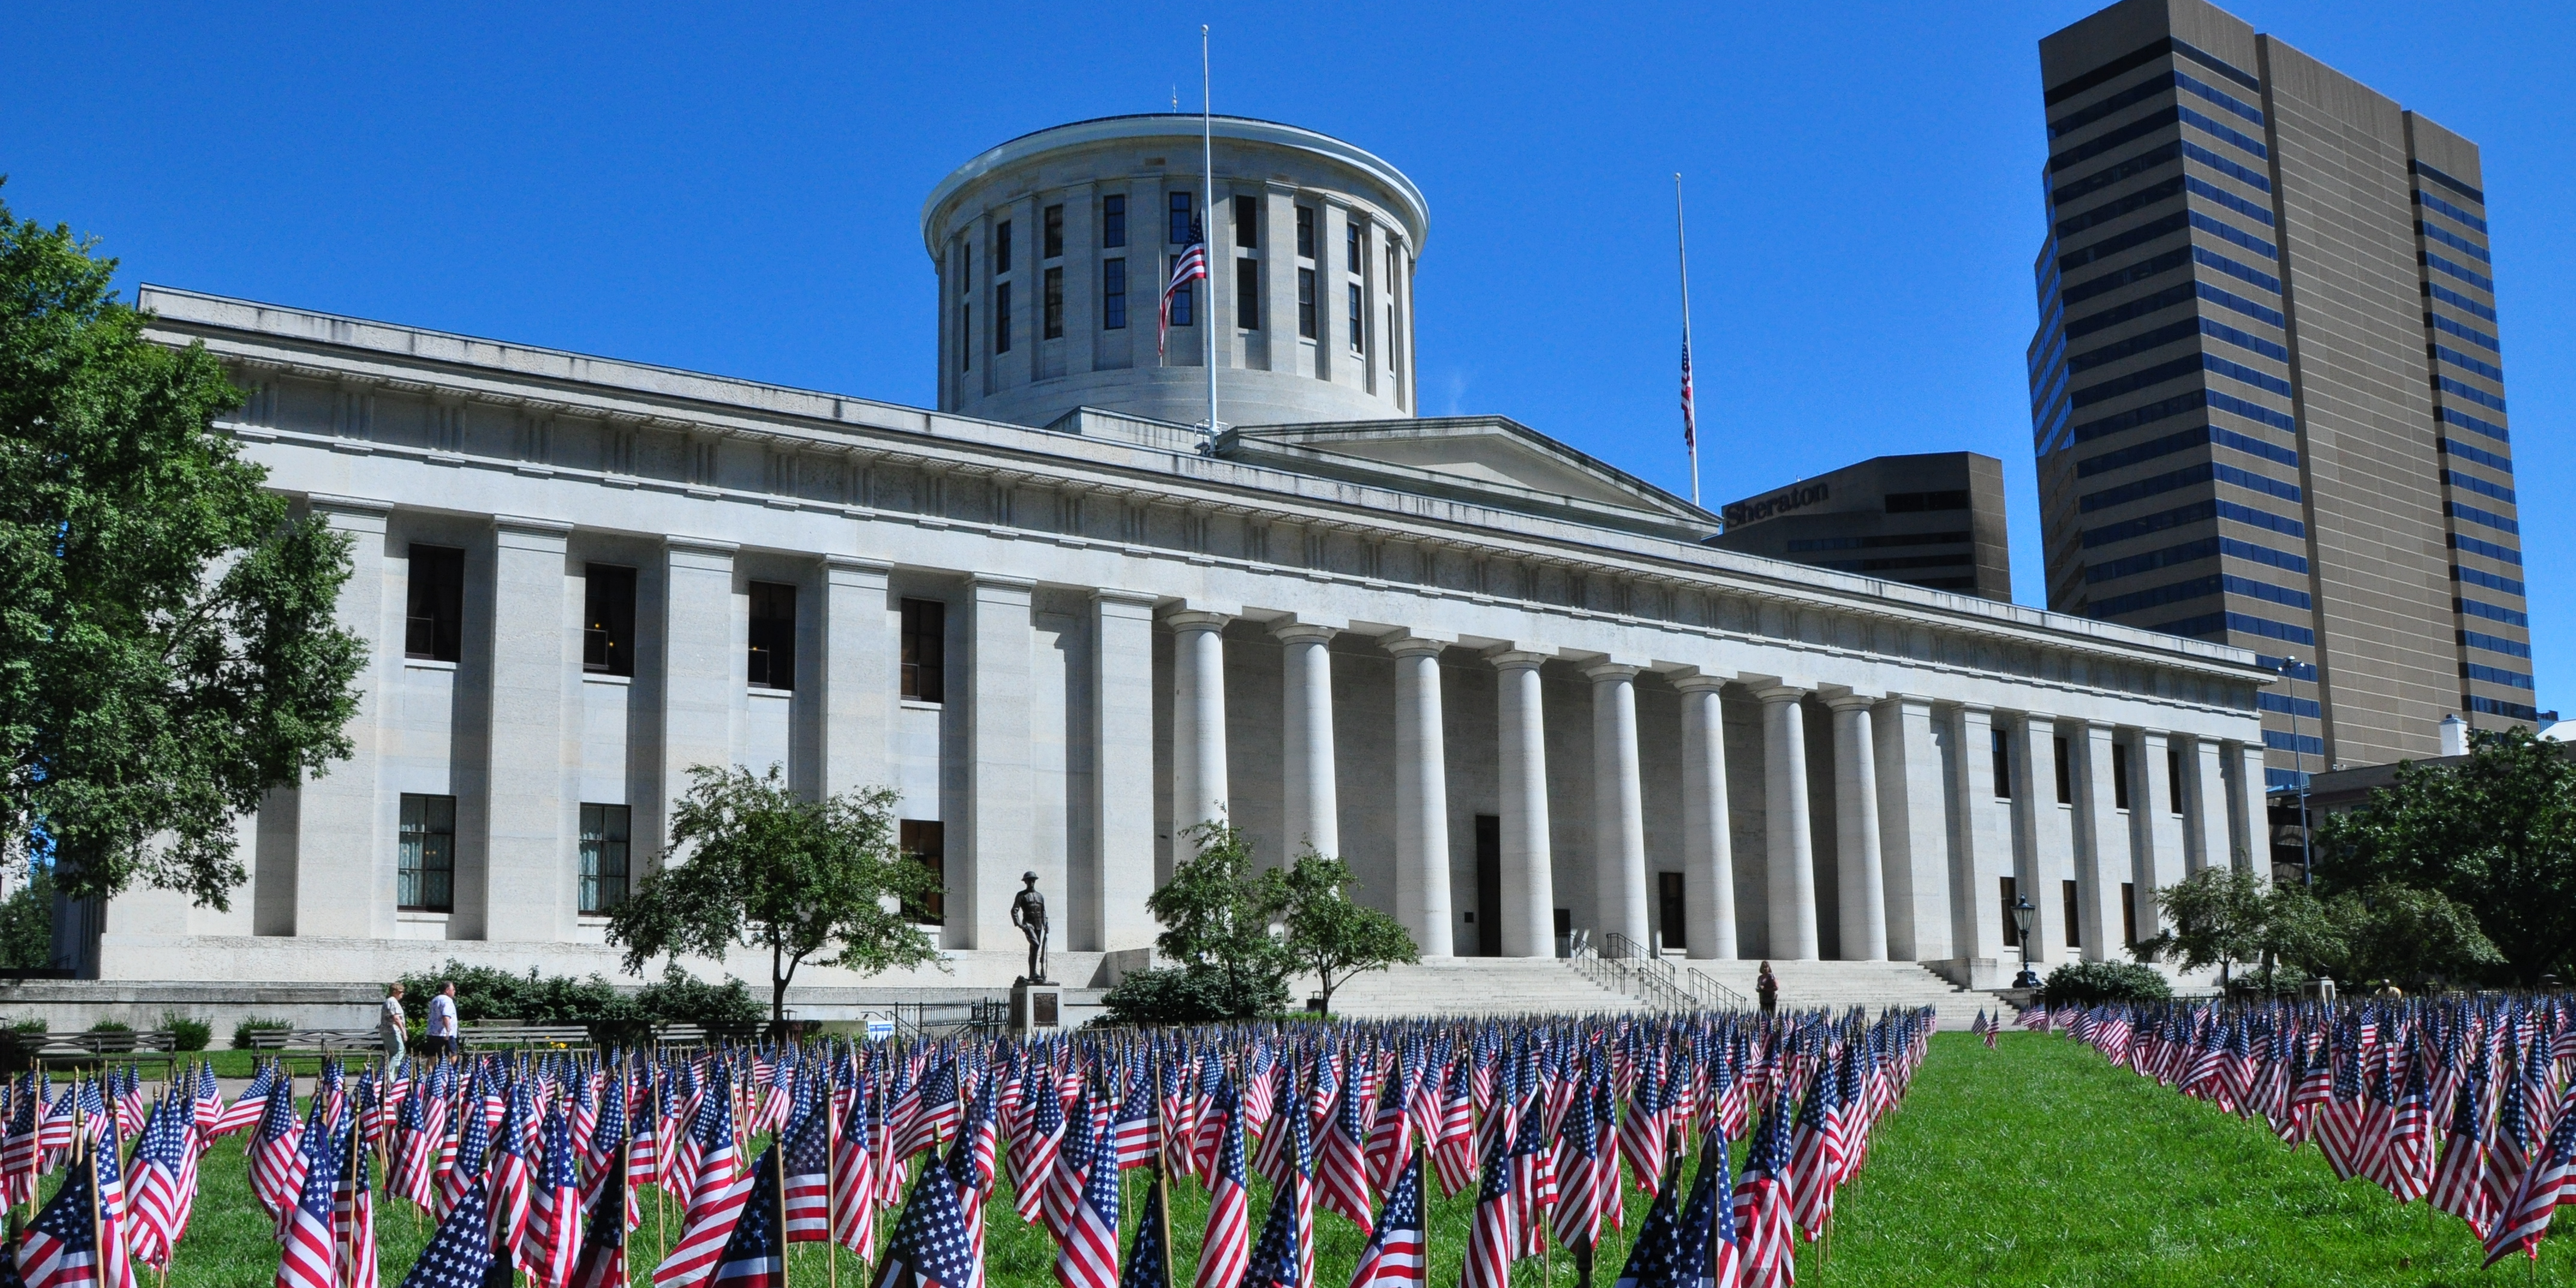 The Ohio State House Lawn